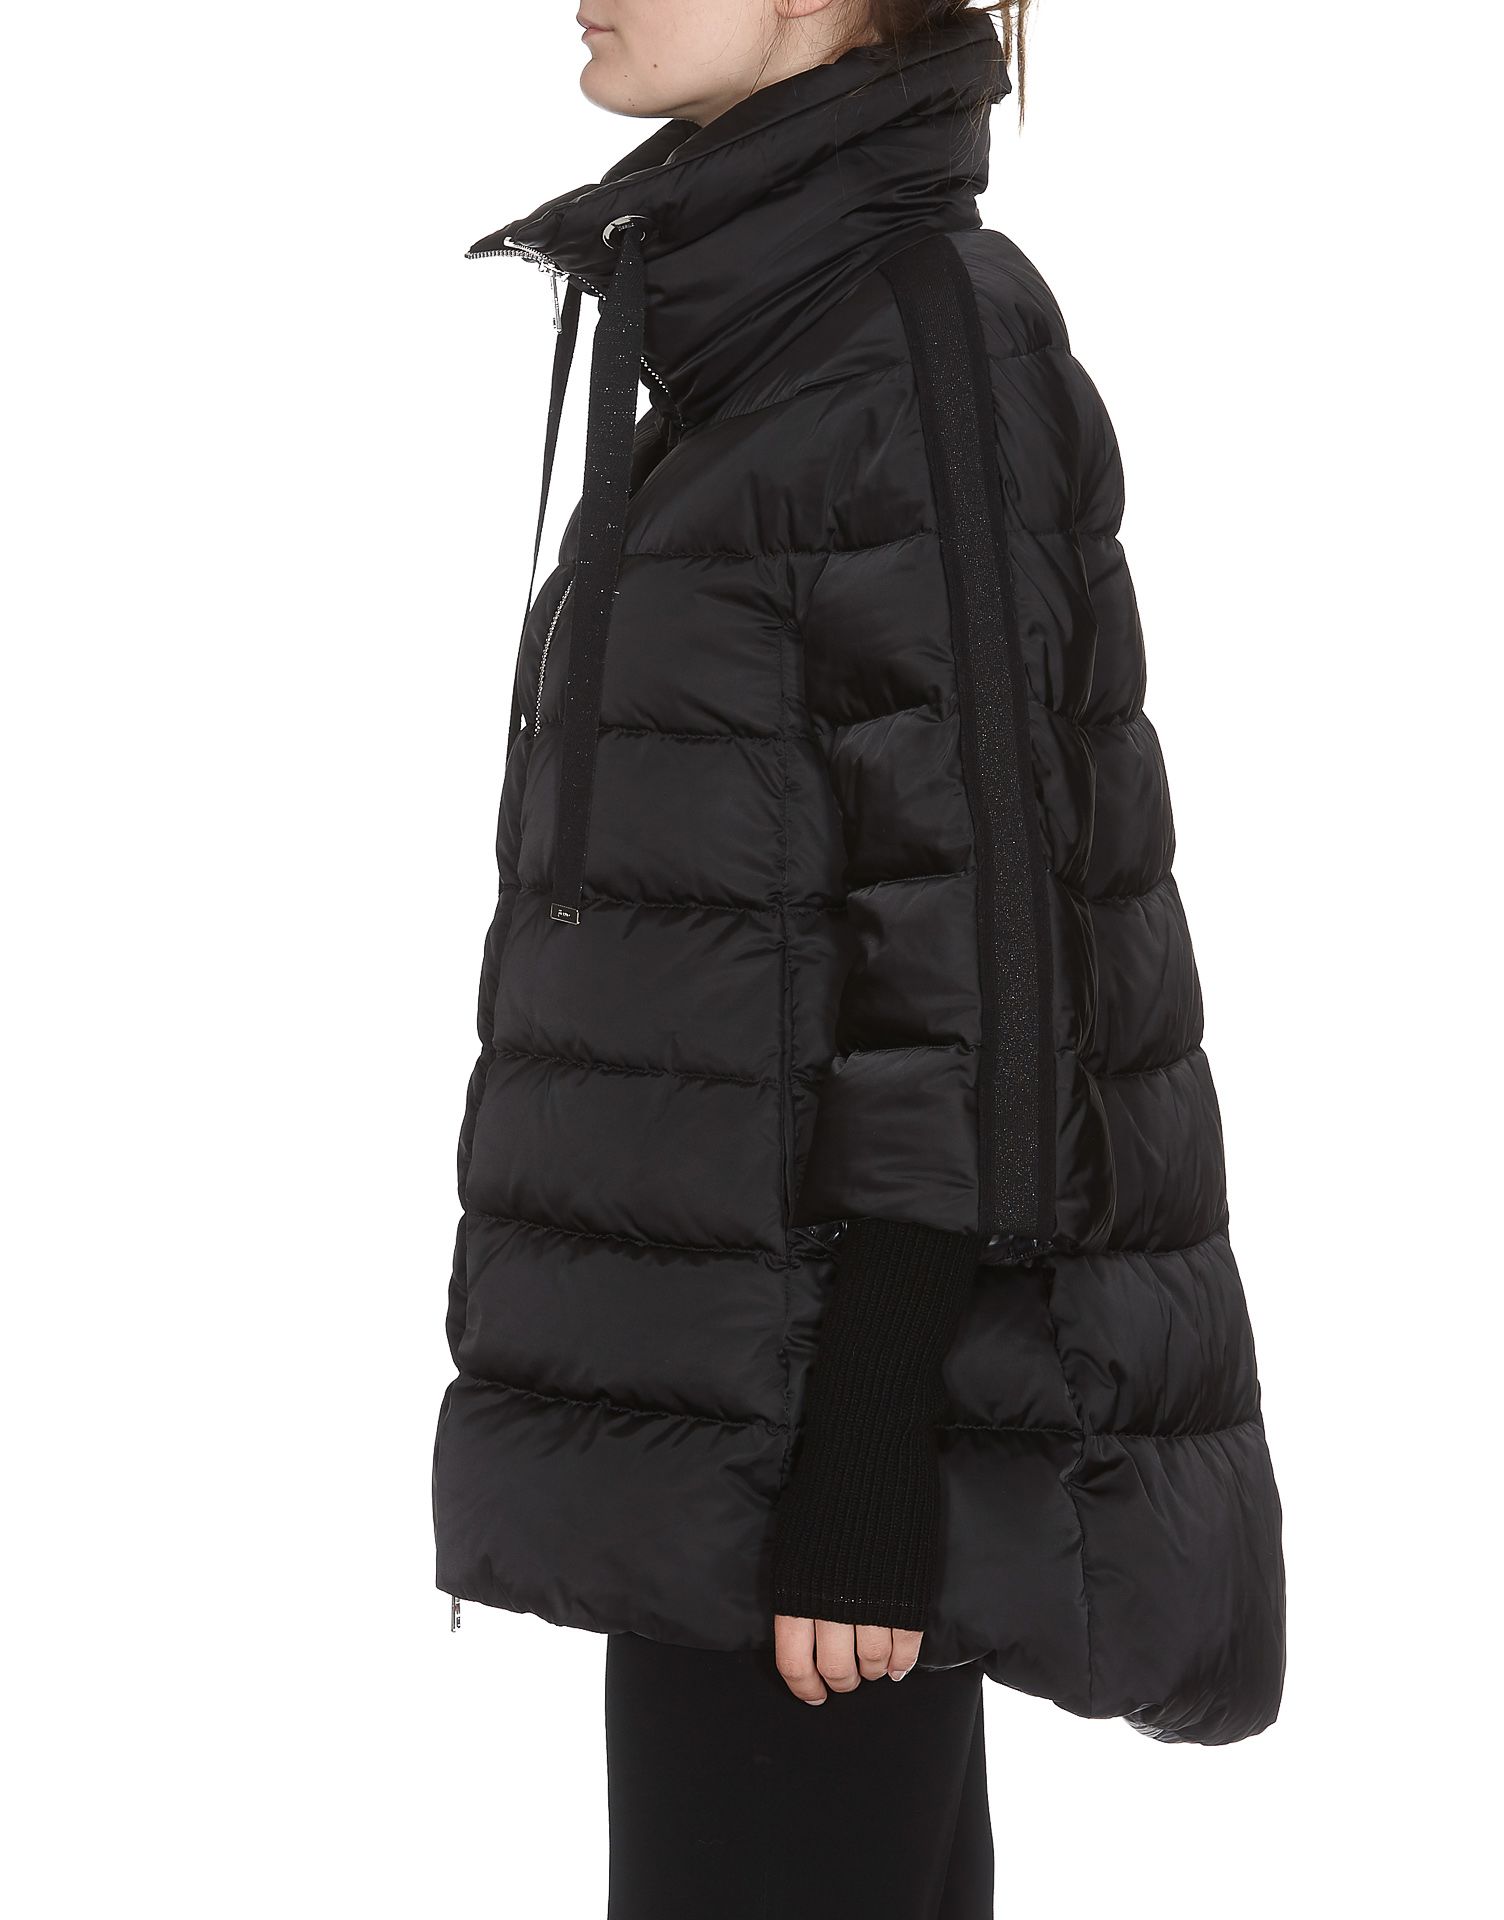 italist | Best price in the market for Herno Herno Down Jacket - Black